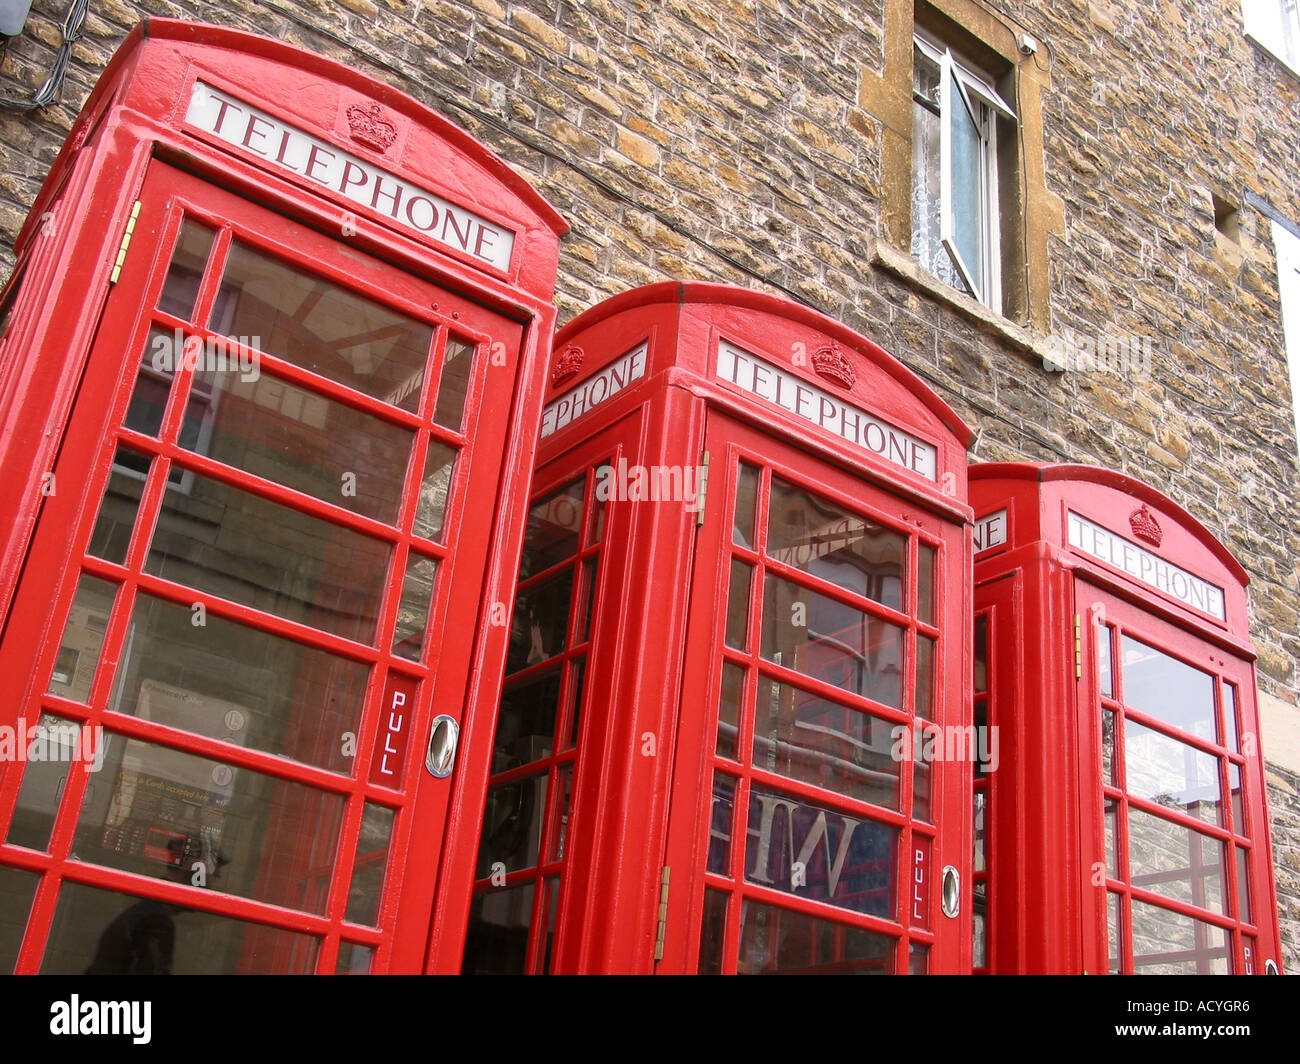 Detail of Three classic red phone boxes Hastings England Stock Photo